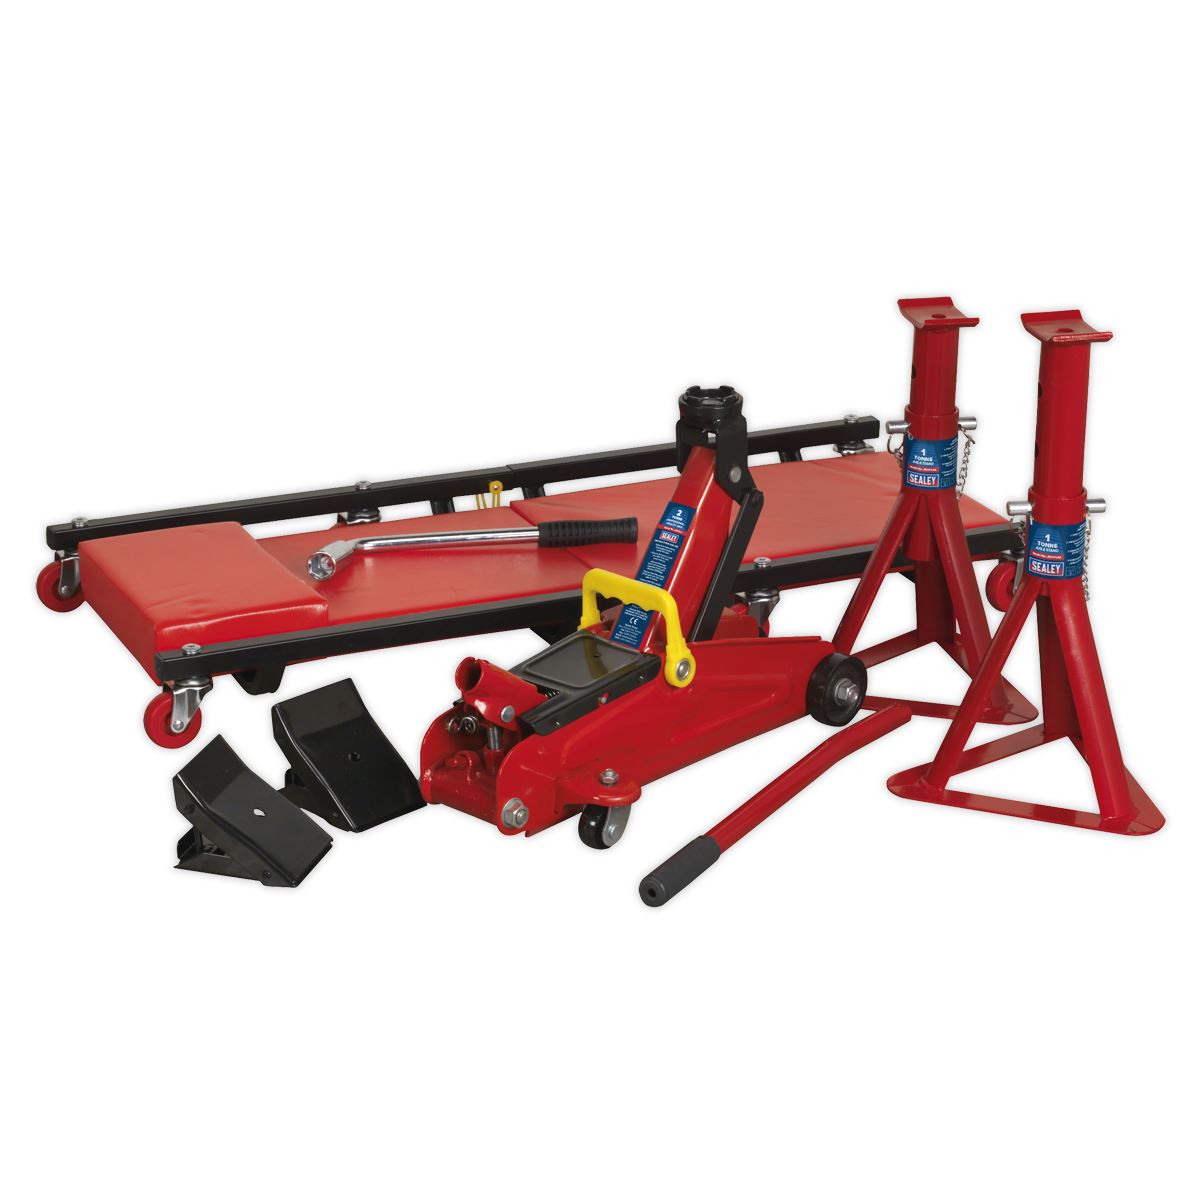 Sealey Lifting Kit 5pc 2 Tonne (Inc Jack, Axle Stands, Creeper, Chocks & Wrench)